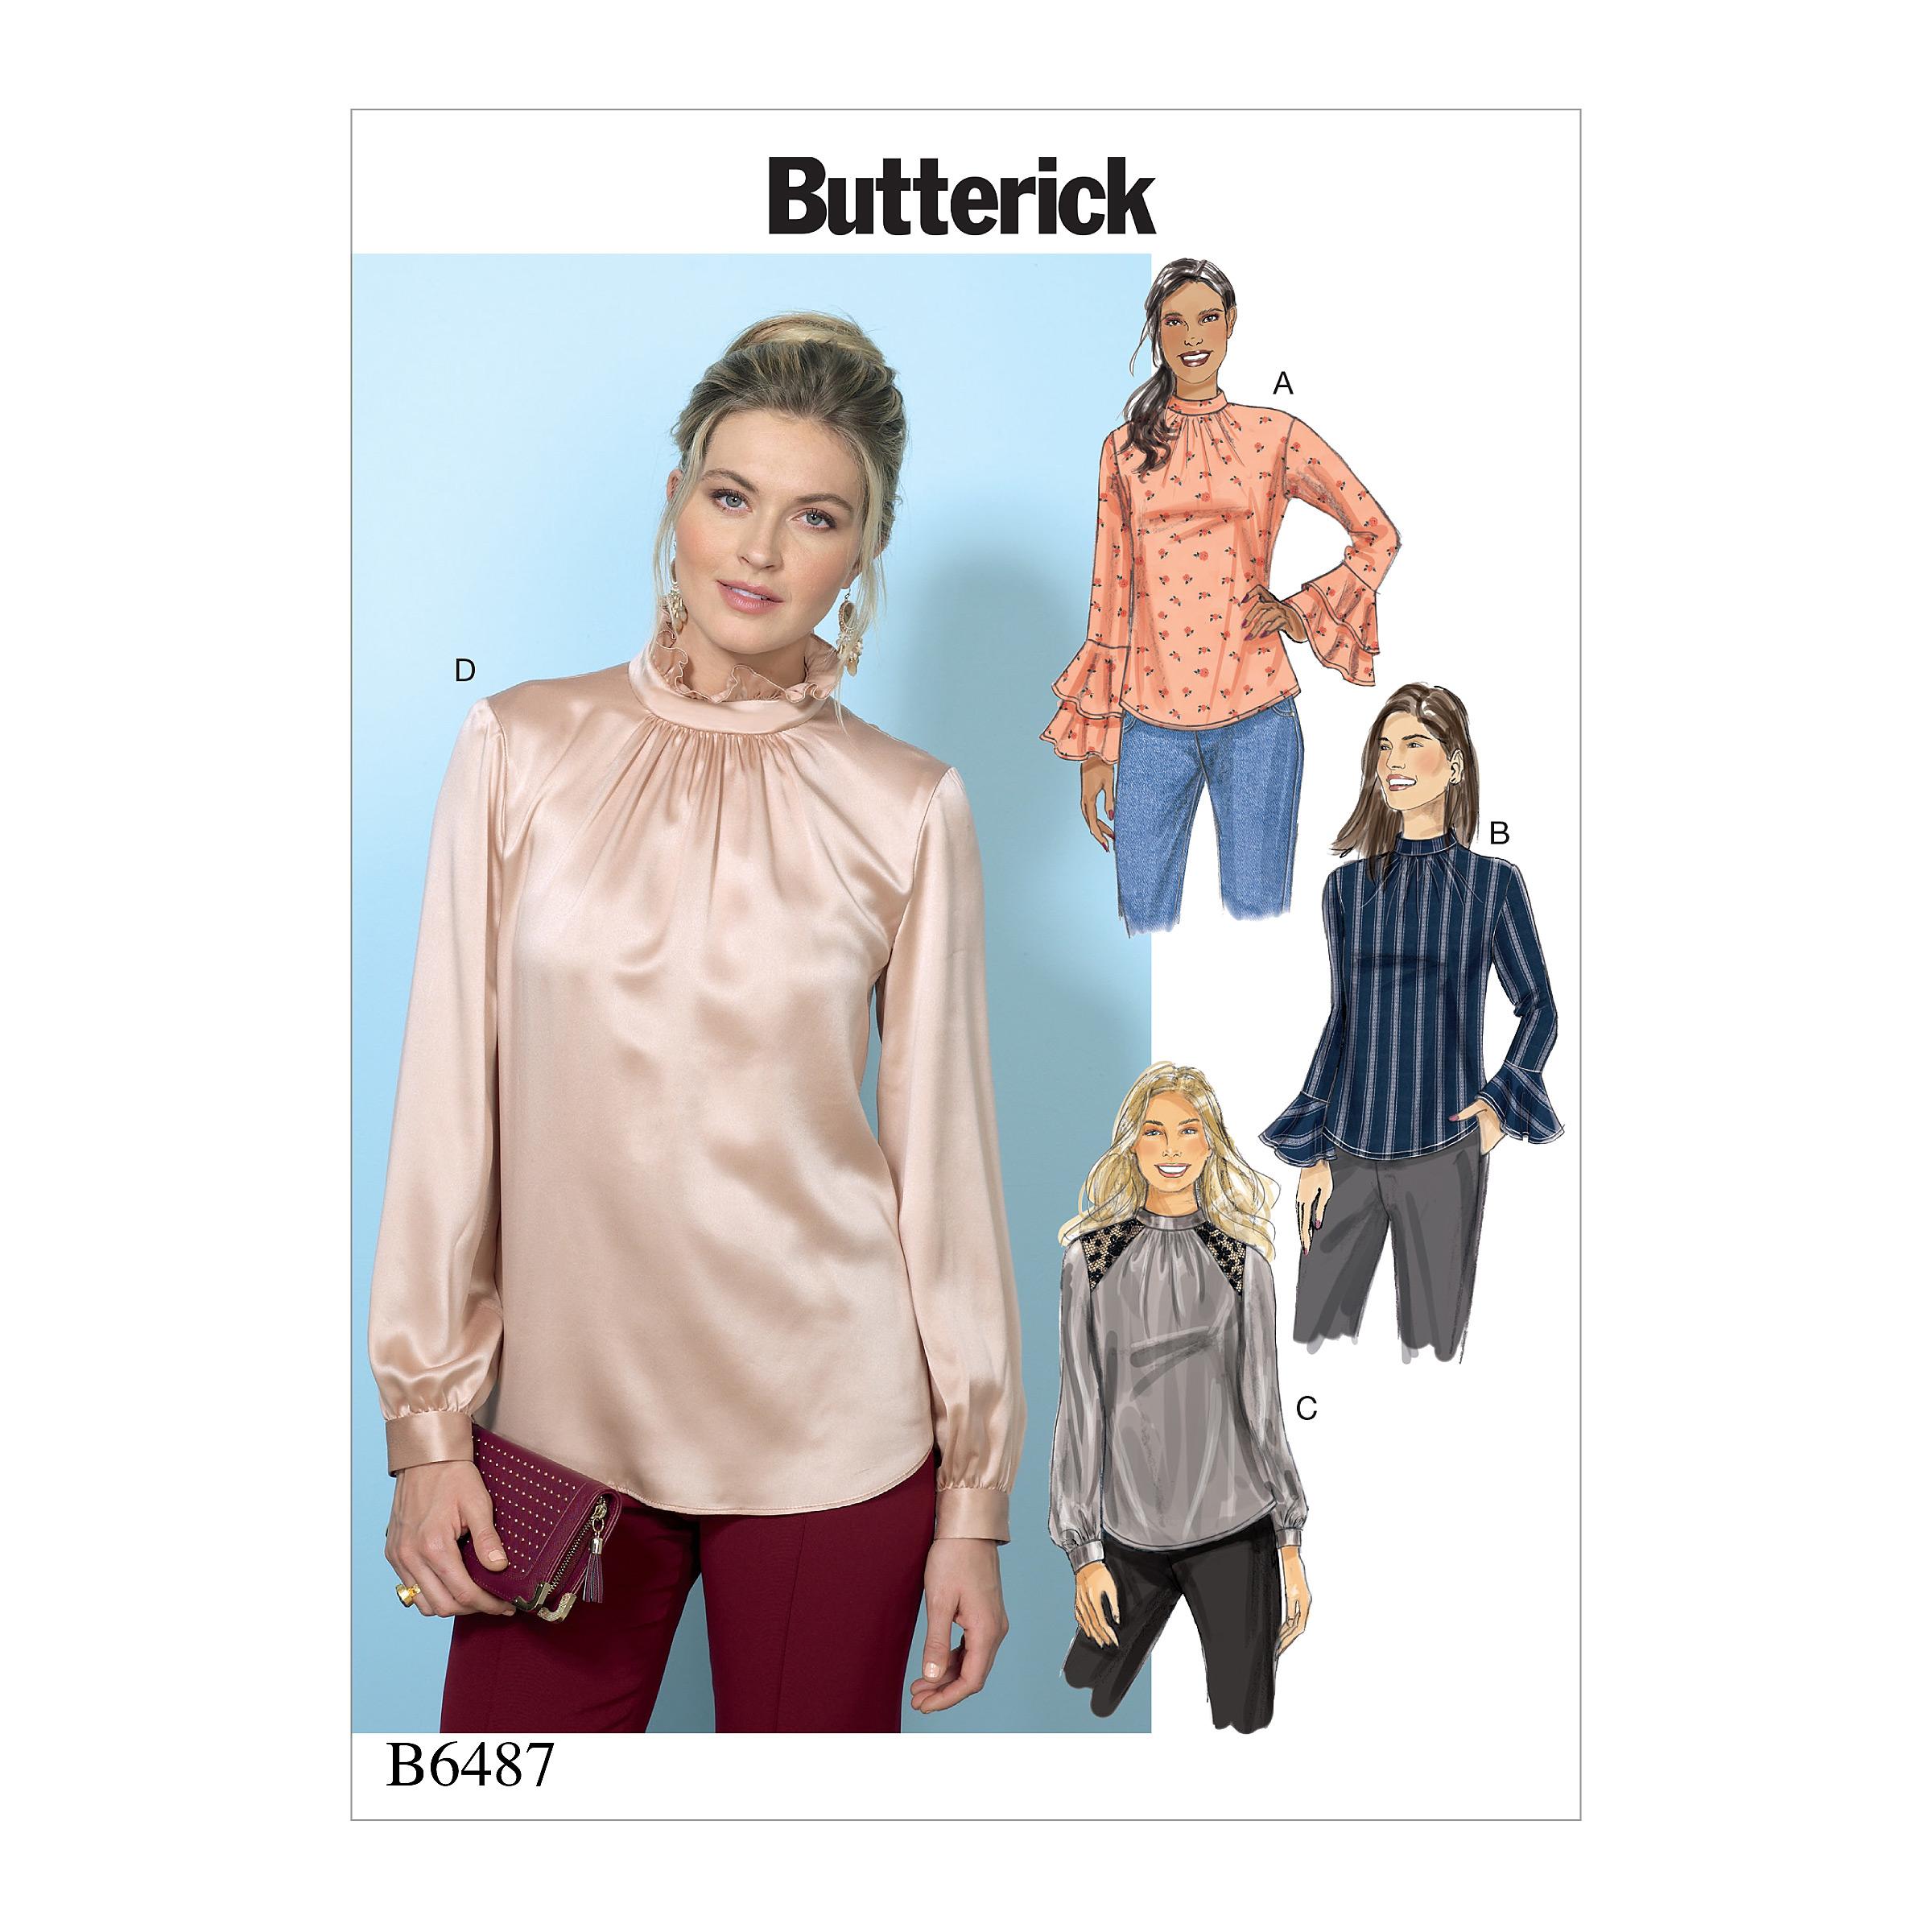 Butterick B6487 Misses' Tops with Gather-Detail Mock-Neck, and Sleeve Variations